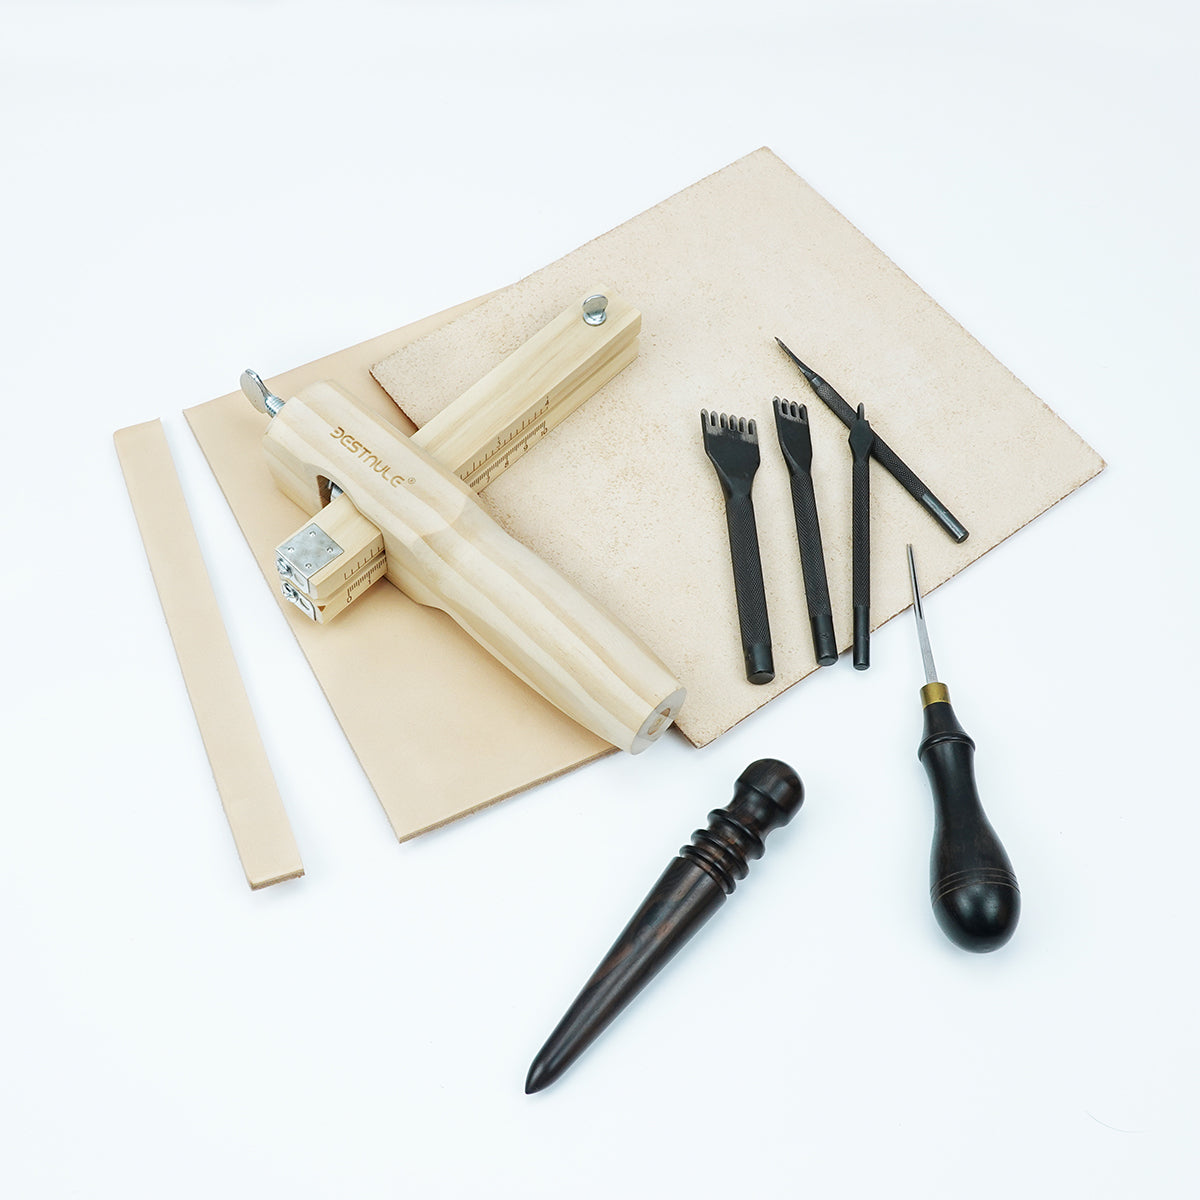 BESTNULE Leather Tools, Leather Strip and Strap Cutter, Leather Cutting Tool, Leather Cutter Adjustable with Blades